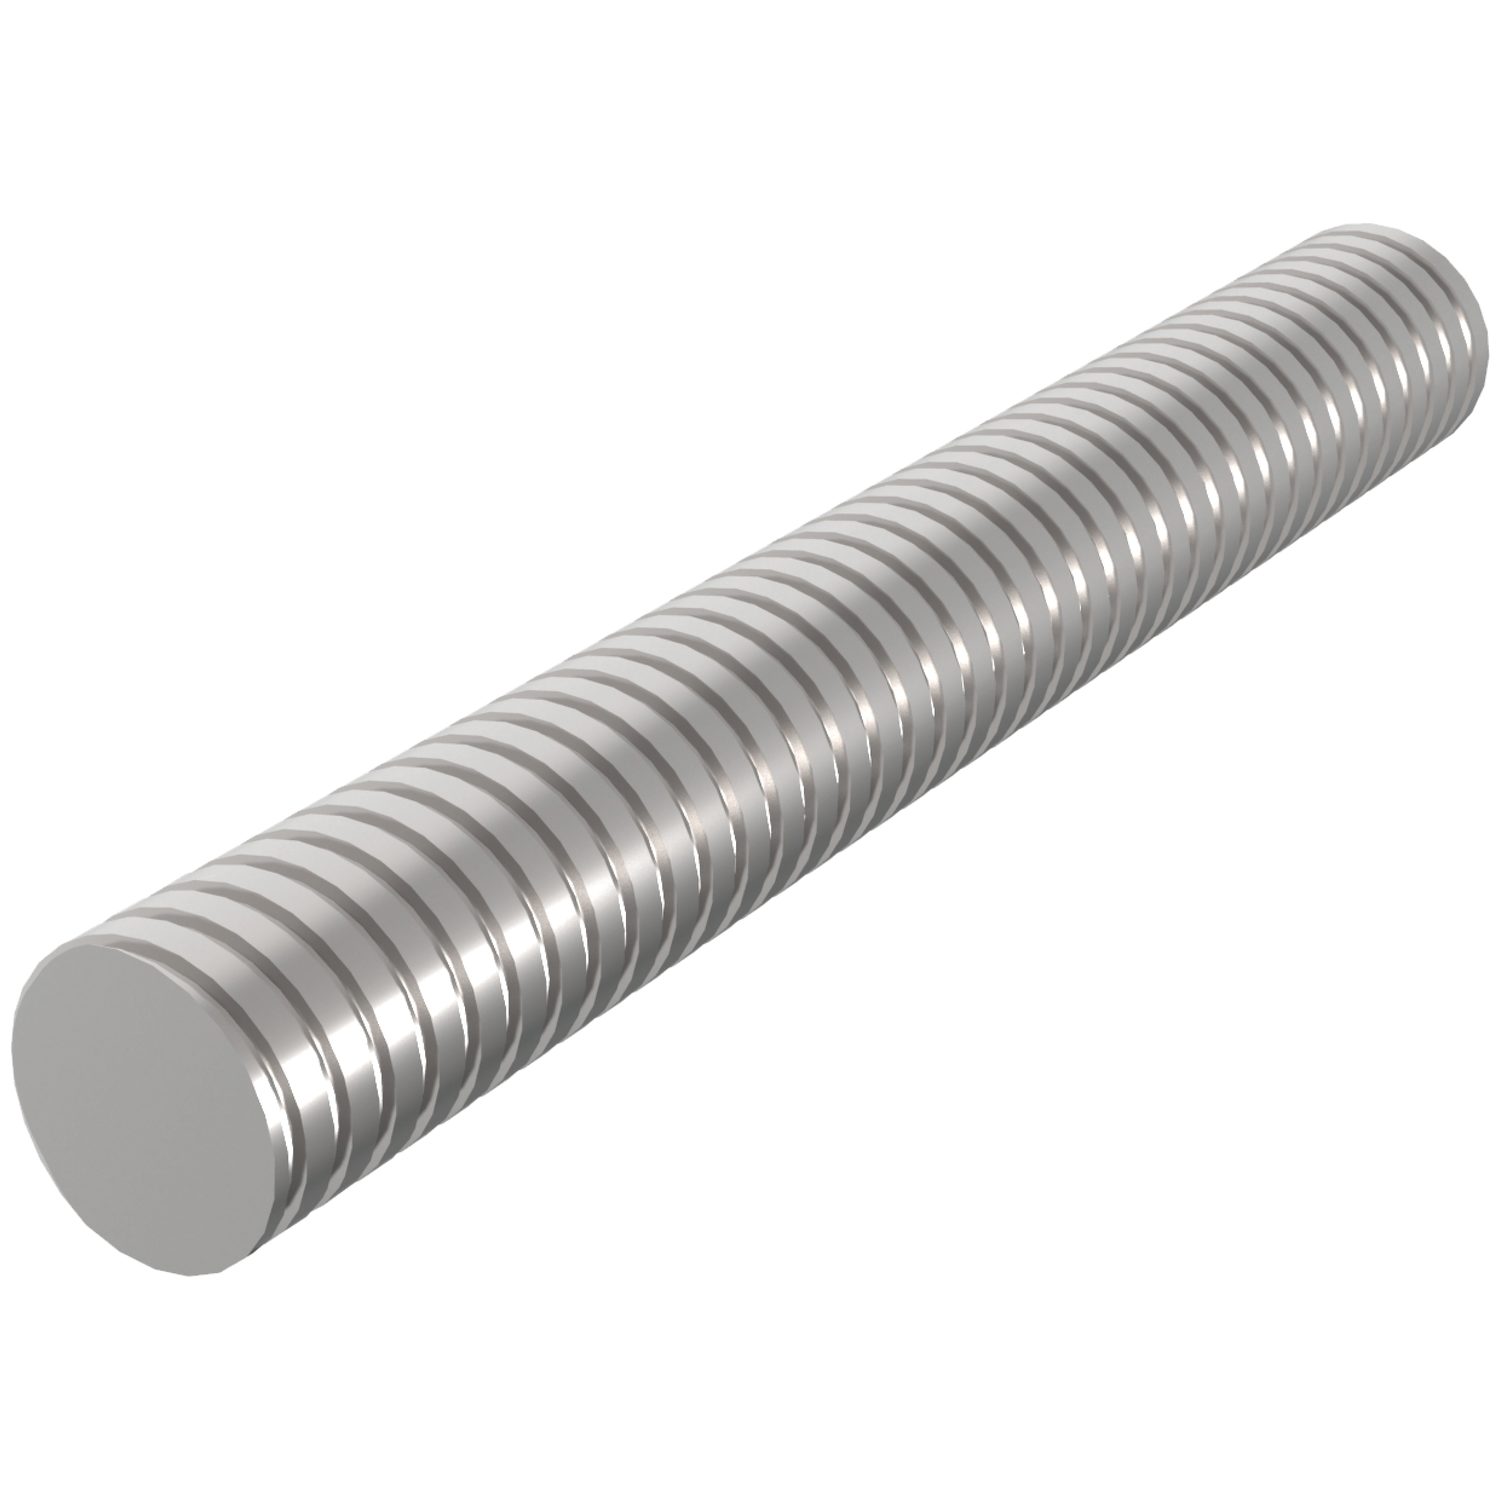 Stainless Lead Screws Rolled trapezoidal AISI 316 grade (A4) stainless steel lead screws, left hand thread. Lengths of up to 6 meters can be provided.